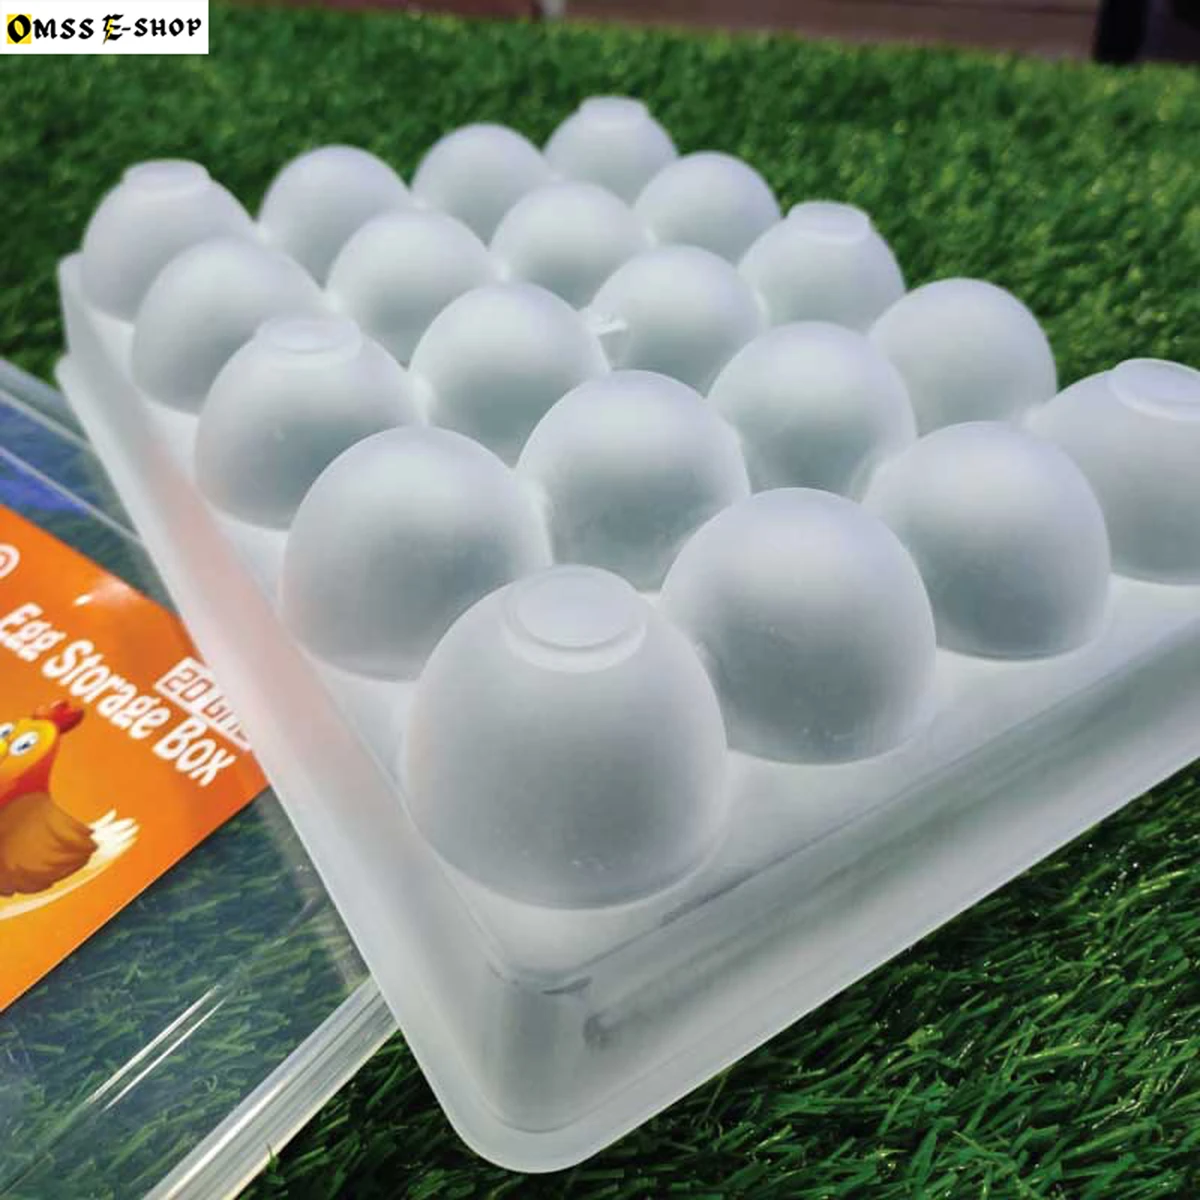 20 Grids Single Layer Egg Storage Container Box With Lid Household Egg Container Refrigerator Food Storage Box RP-160DH-RE